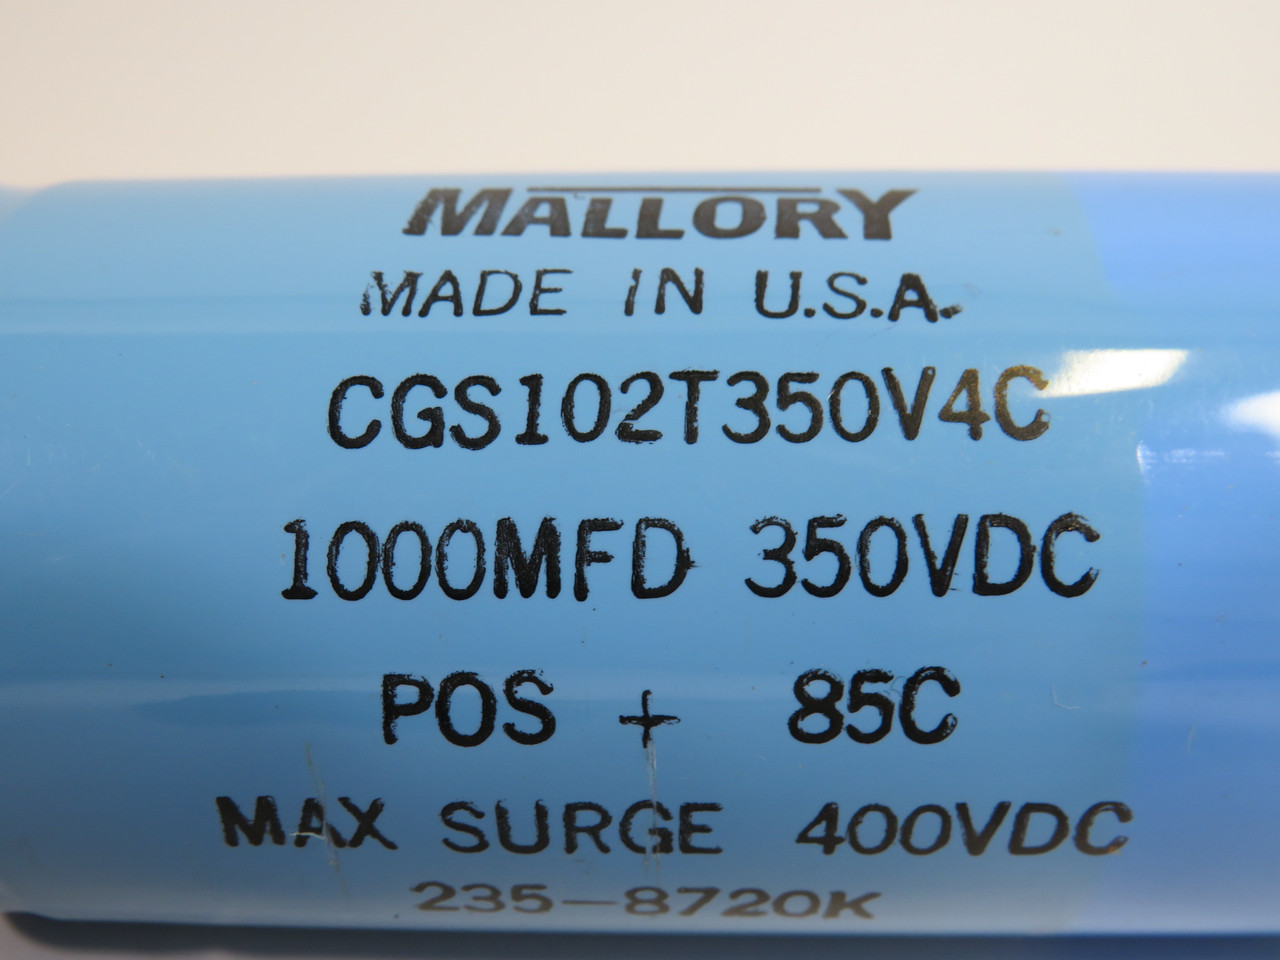 Mallory CGS102T350V4C Screw Terminal Capacitor 1000MFD COSMETIC DMG USED